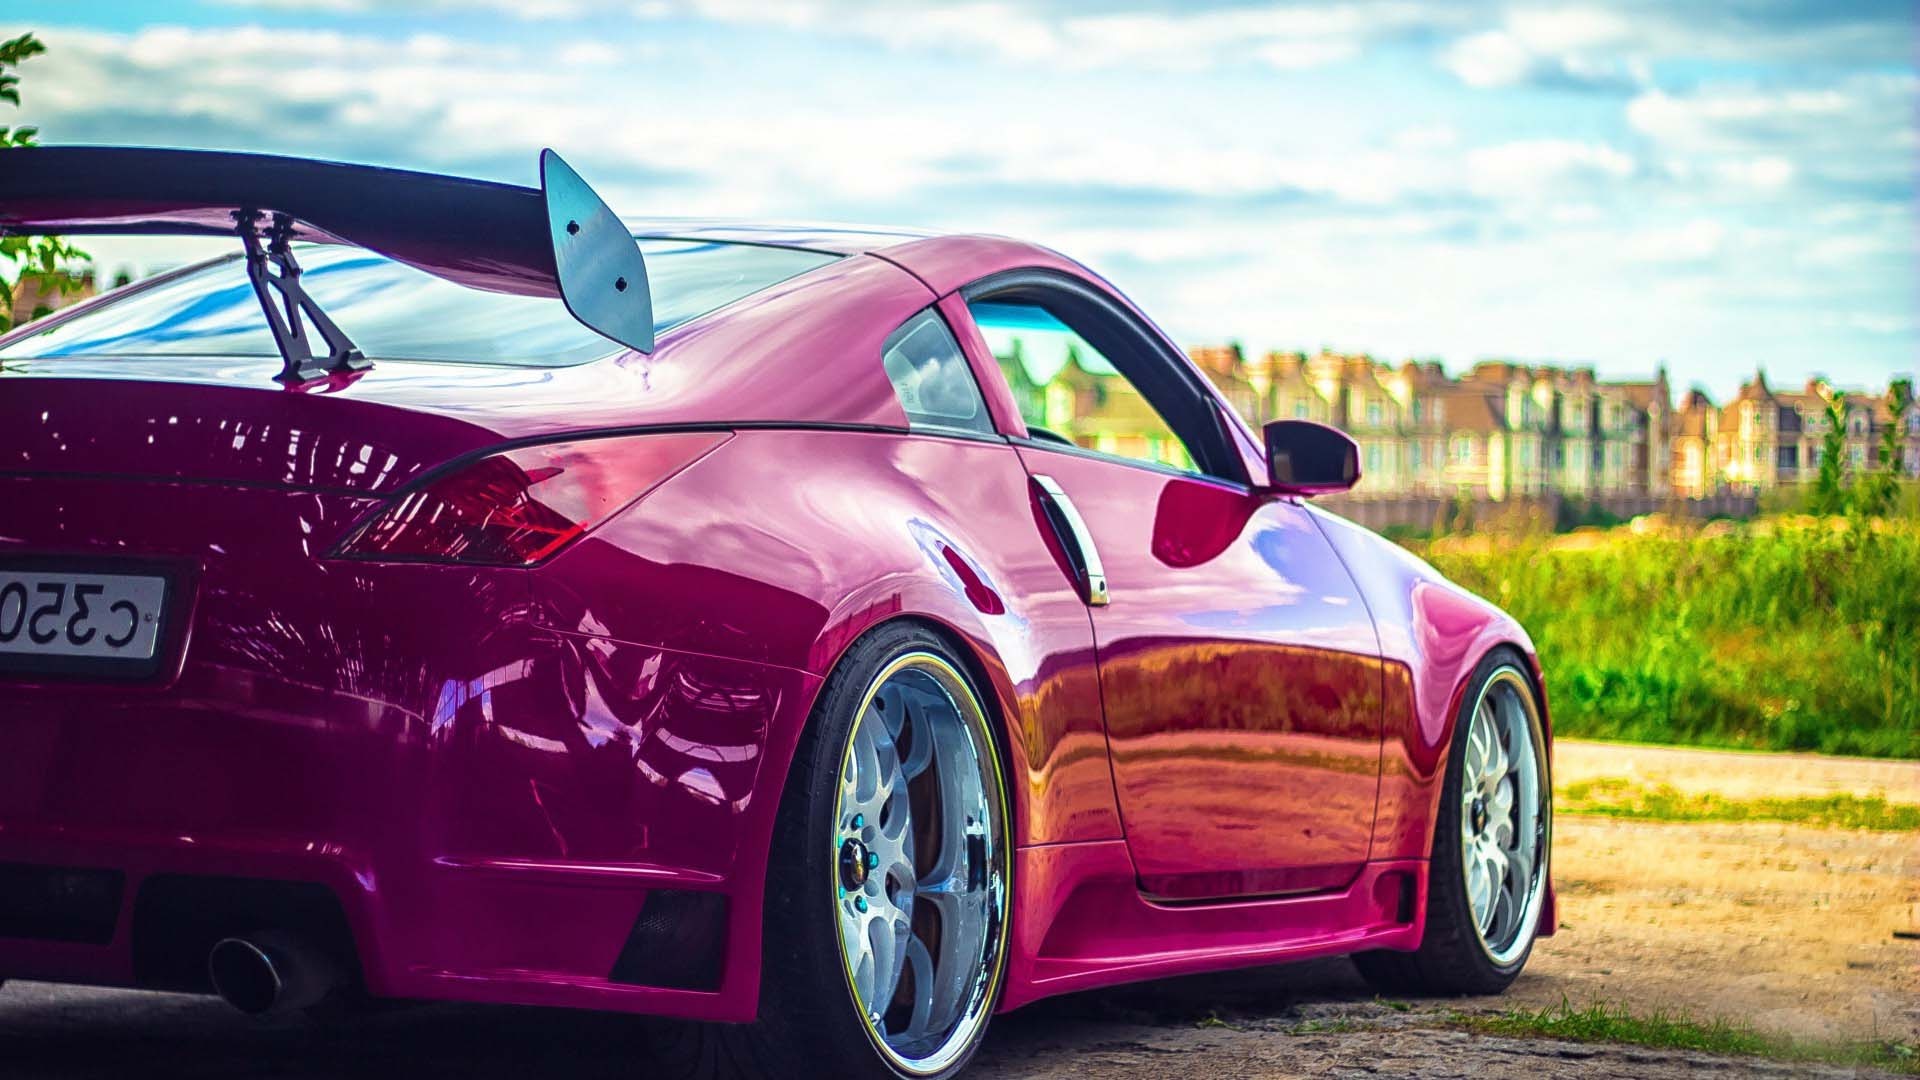 Best Pink Car Wallpapers Full HD Pictures